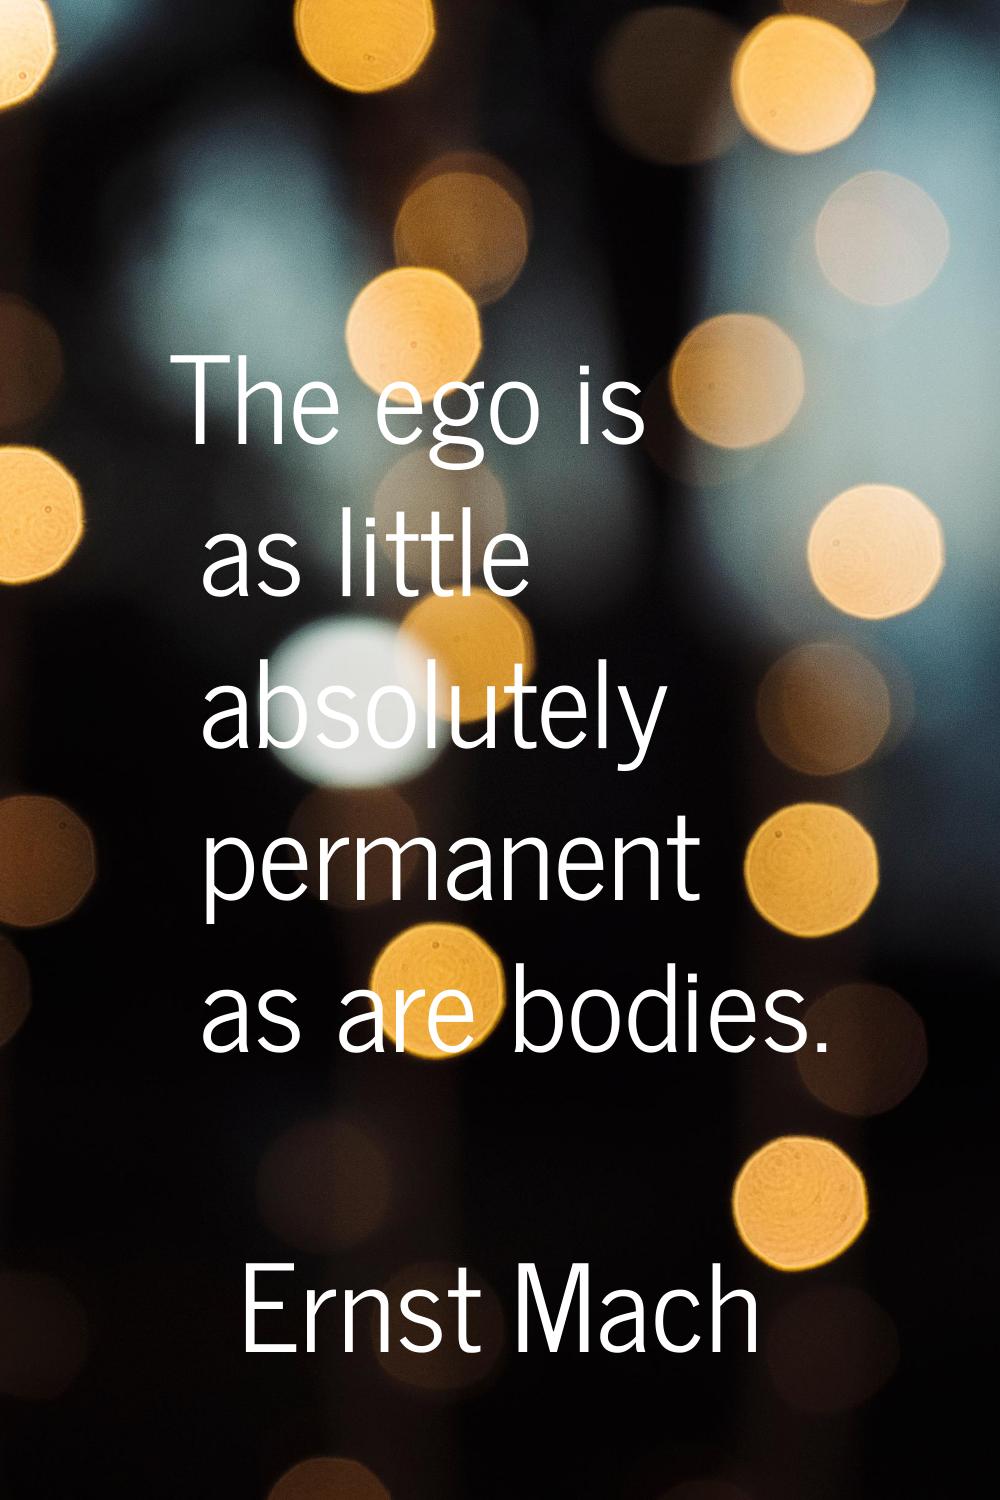 The ego is as little absolutely permanent as are bodies.